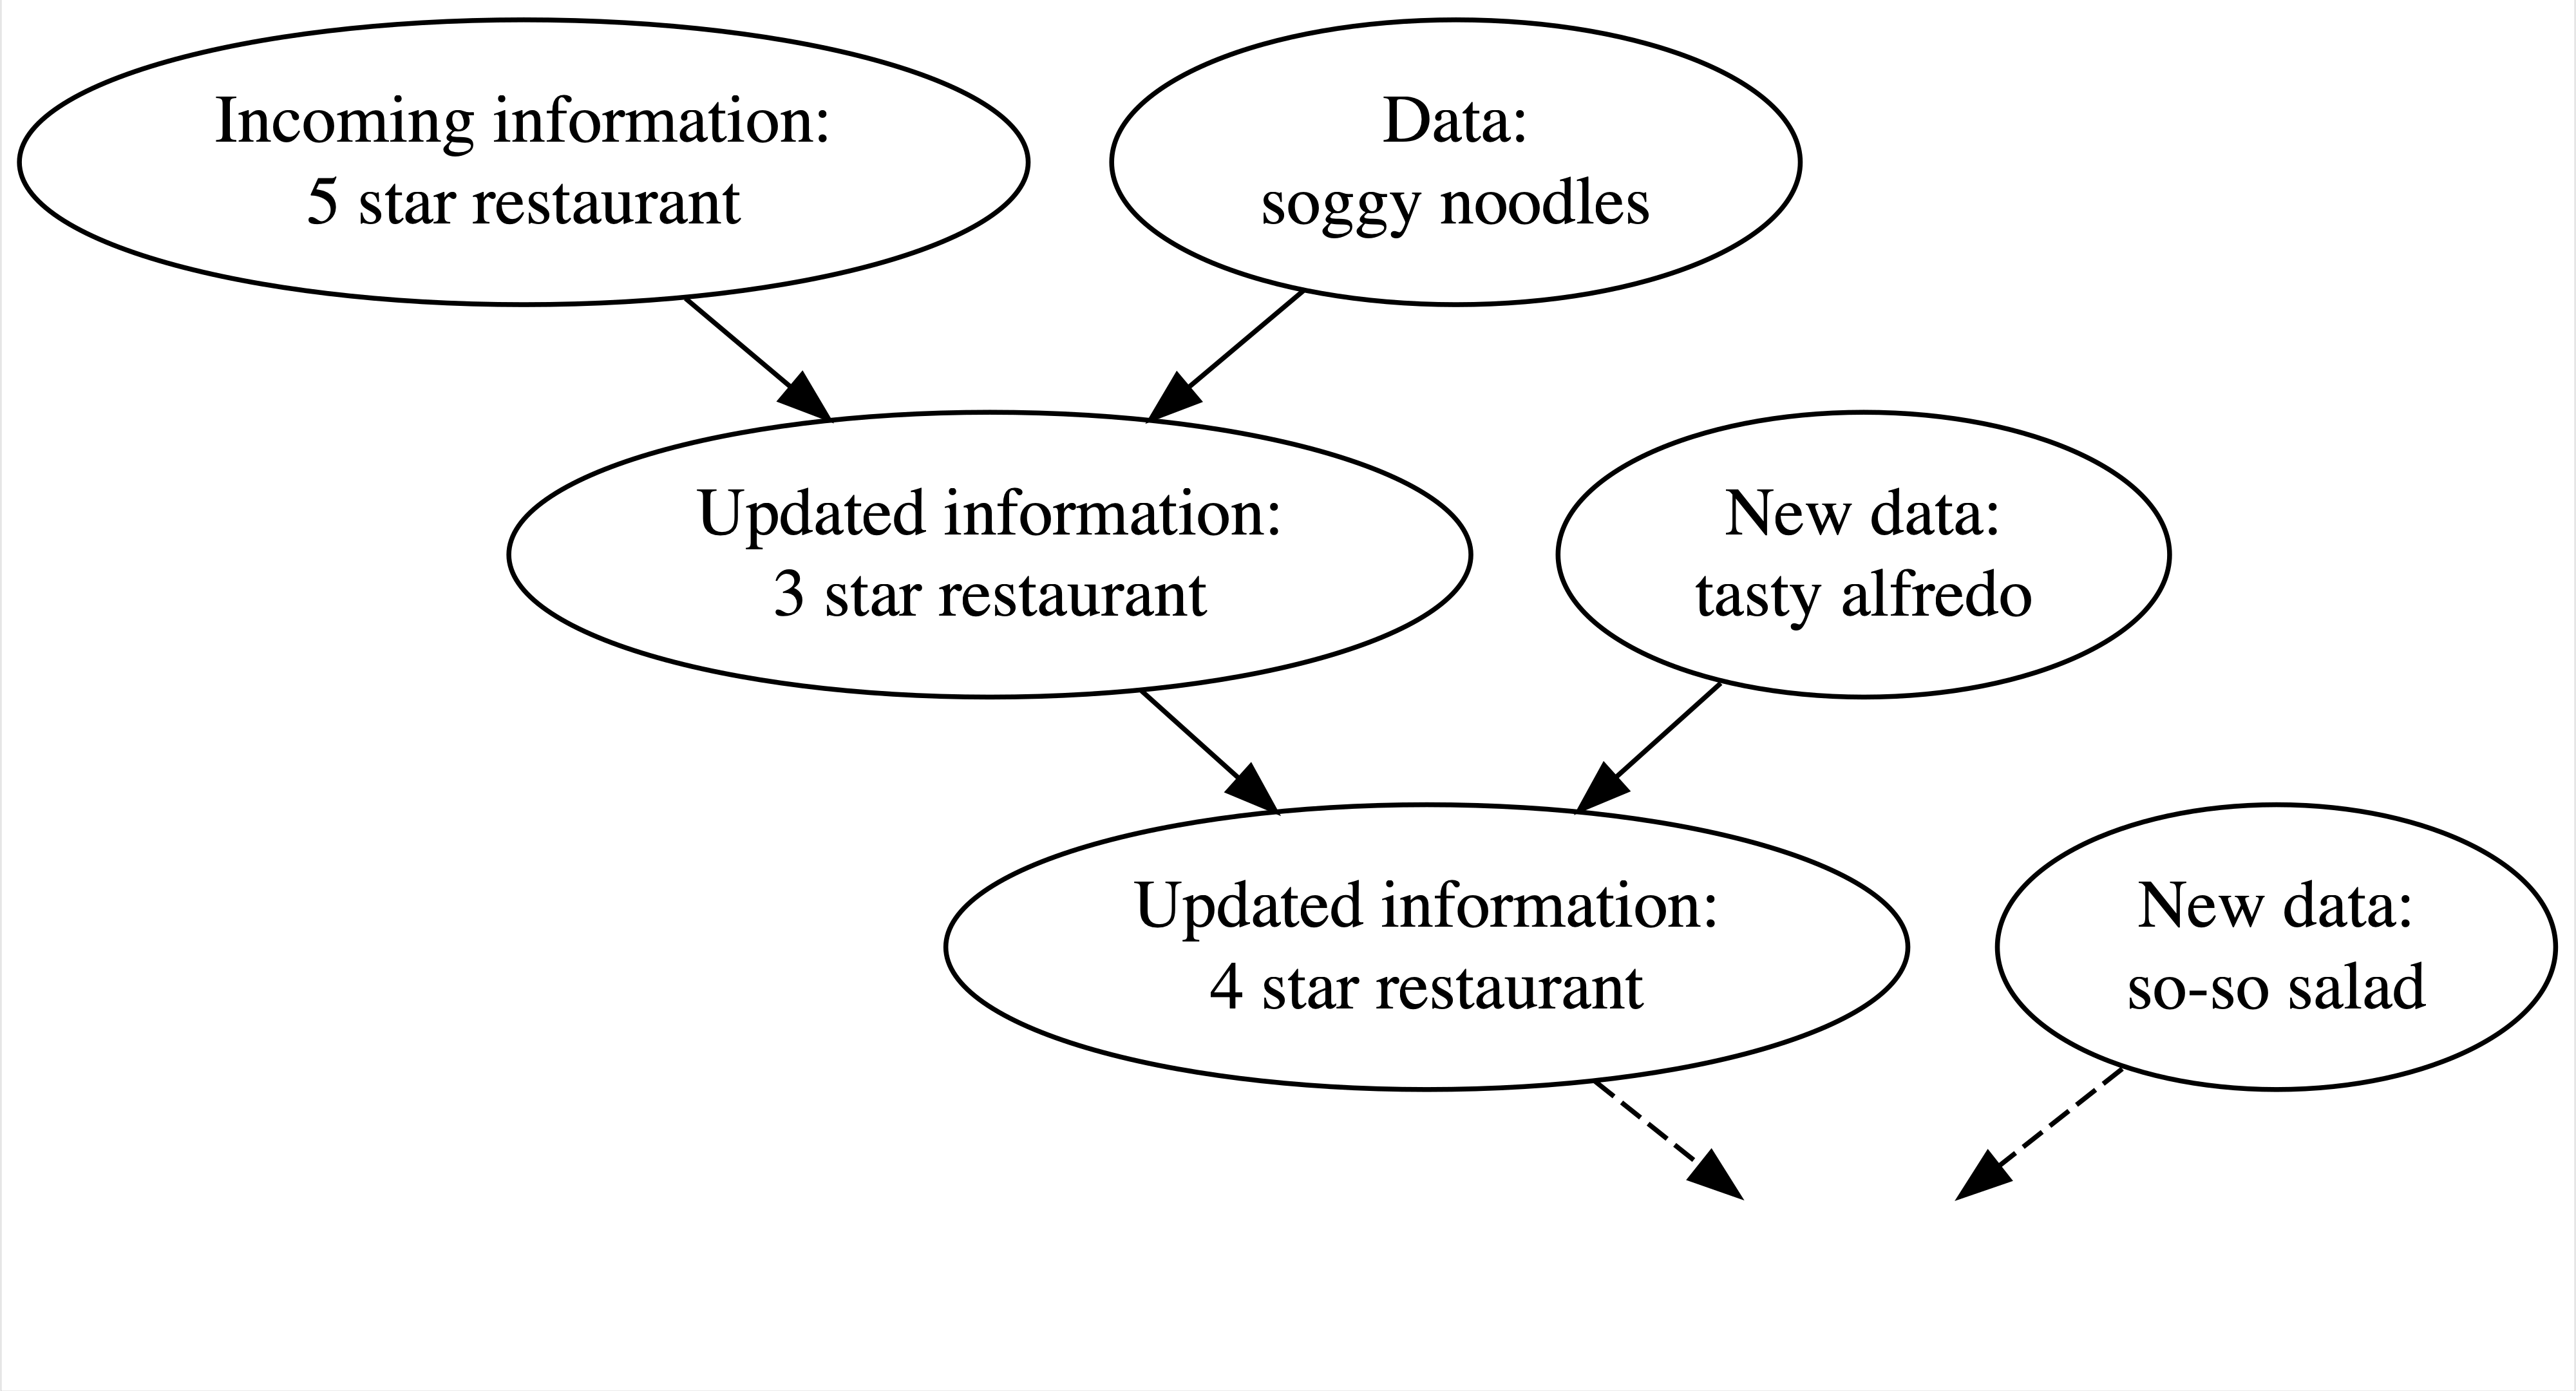 A flow chart that has two ellipses at the same level. One ellipse reads incoming information 5 star restaurant and the other reads data soggy noodles. The two ellipses have an arrow pointing to another ellipse at a lower level. This ellipse reads updated information 3 star restaurant. There is another ellipse to the right of this one that reads new data tasty alfredo. The two ellipses also have an arrow pointing to another ellipse at a lower level that reads updated information 4 star restaurant. There is another ellipse to the right of this one that reads new-data so-so salad. The two ellipses of updated information and the new data have arrows pointing to the lower level without any new ellipses.